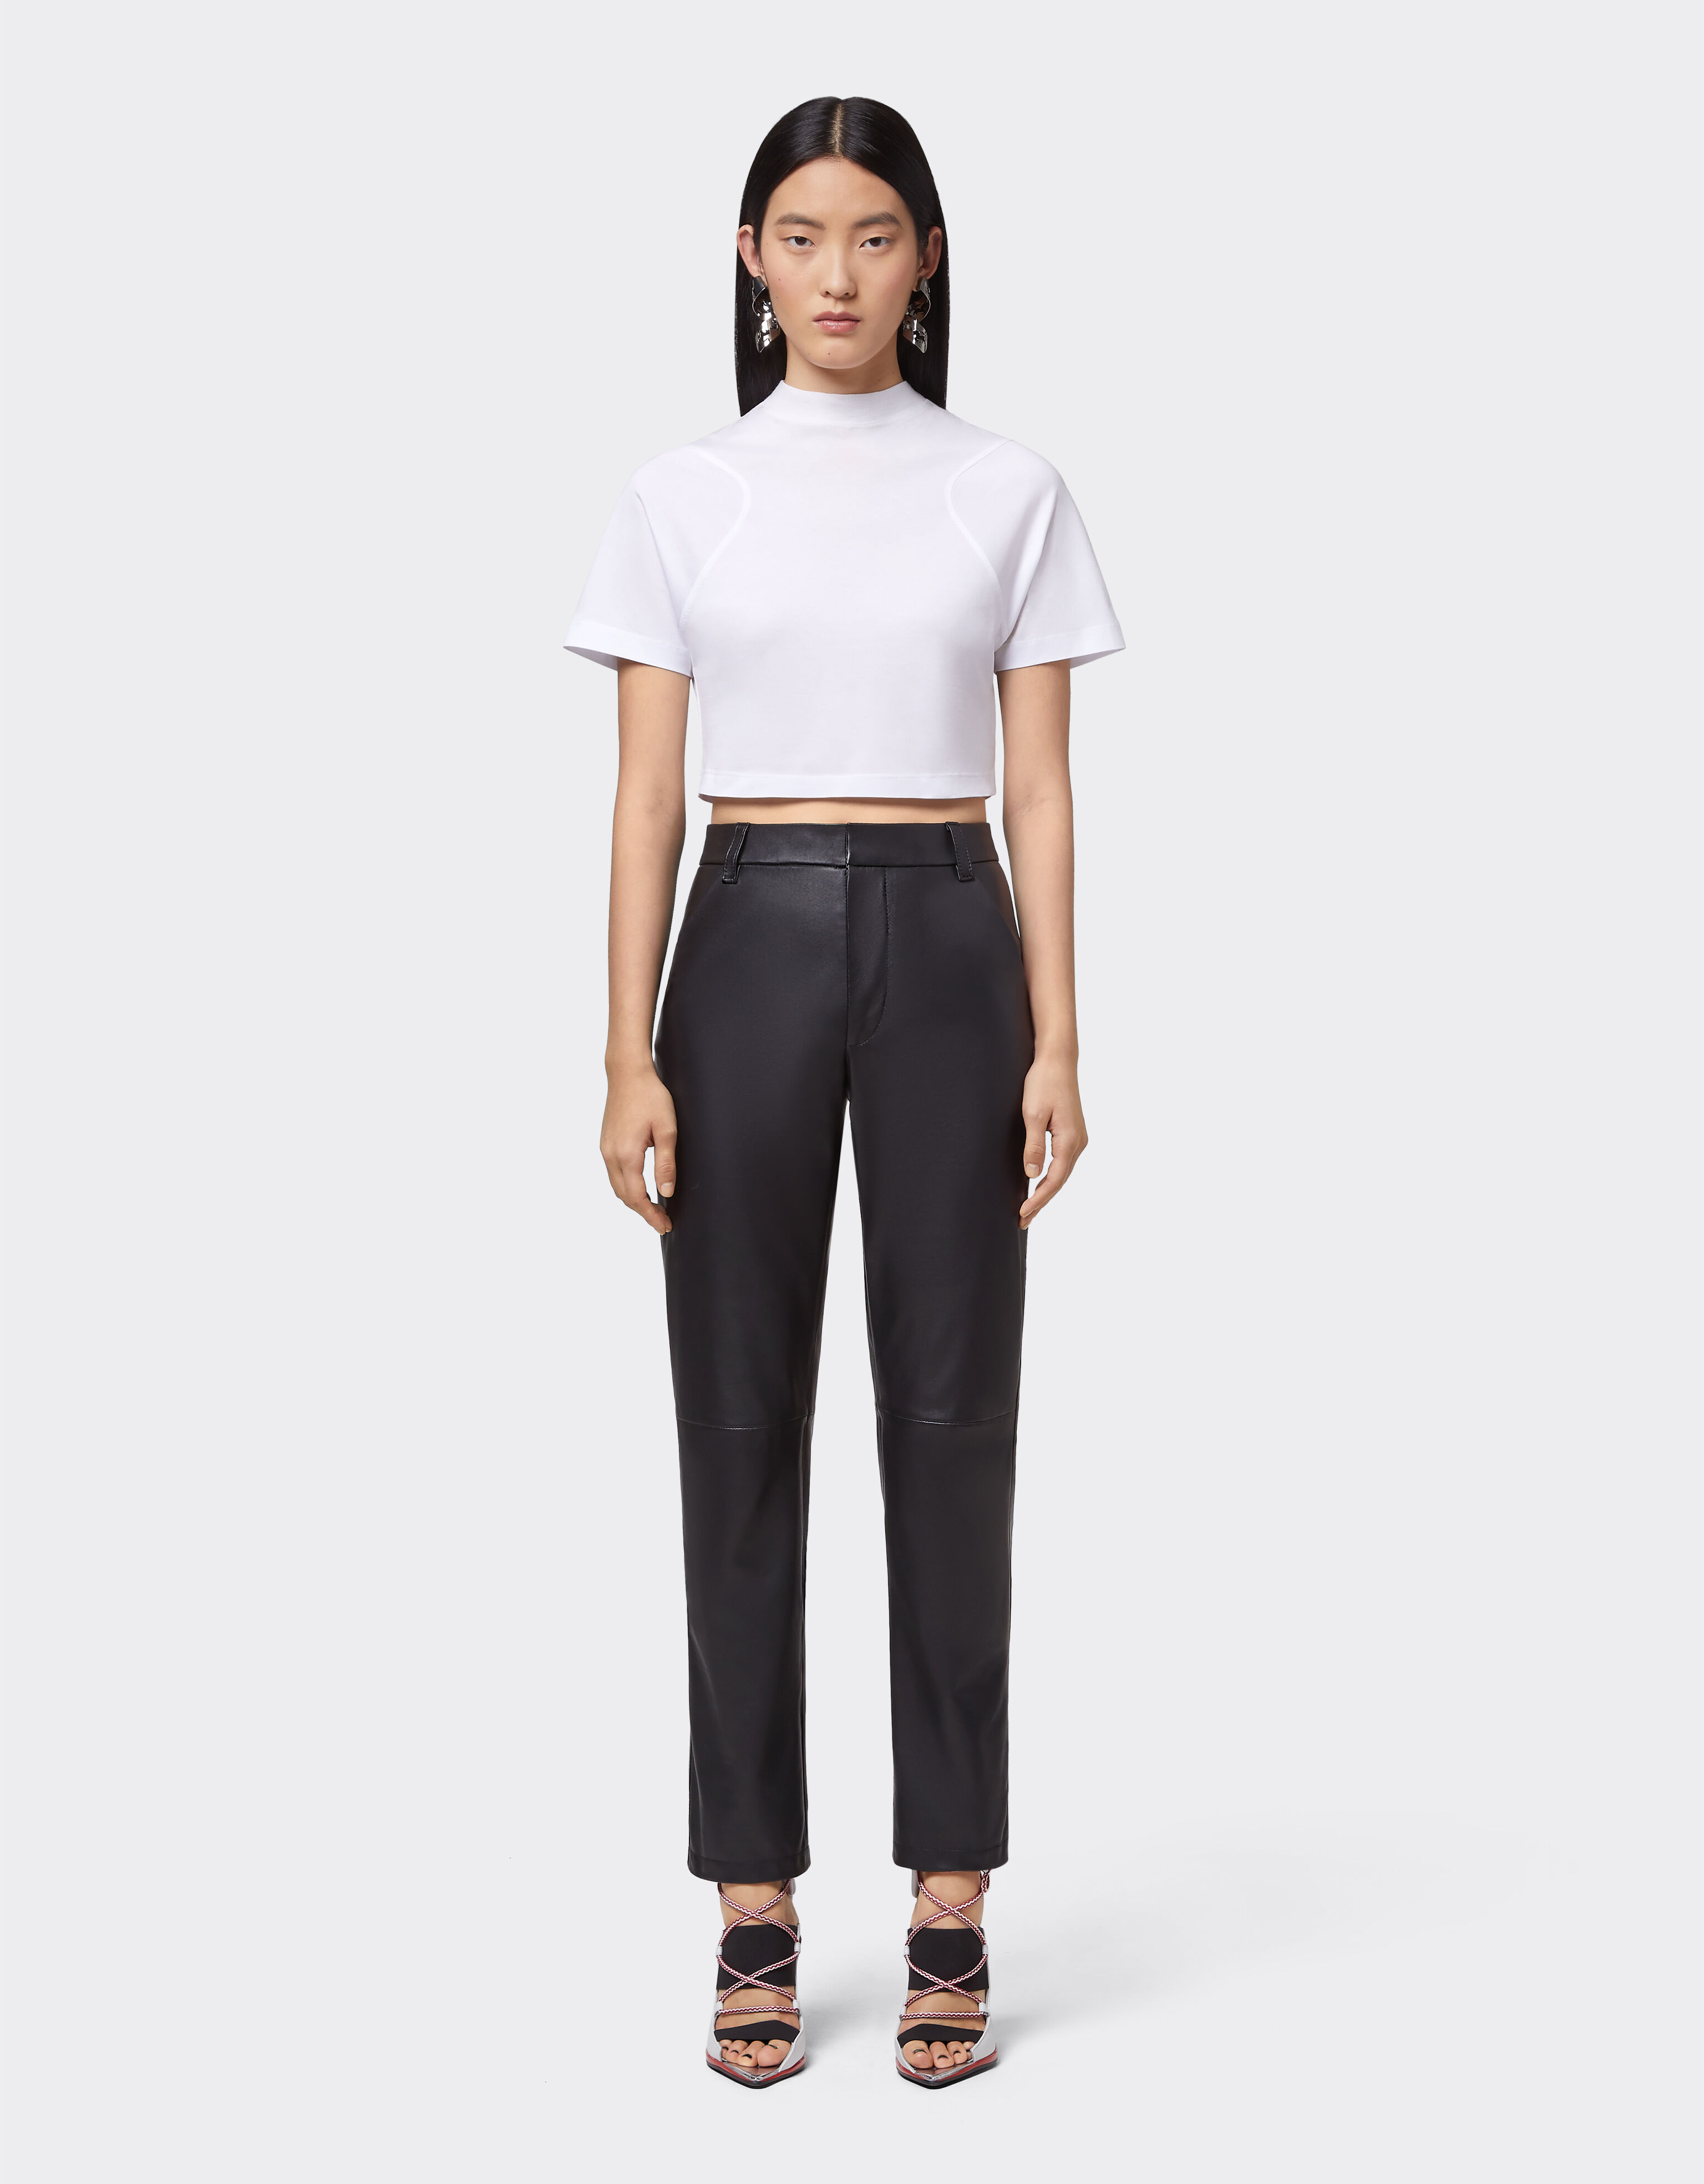 Ferrari Cropped T-shirt in solid-colour jersey Optical White 20196f